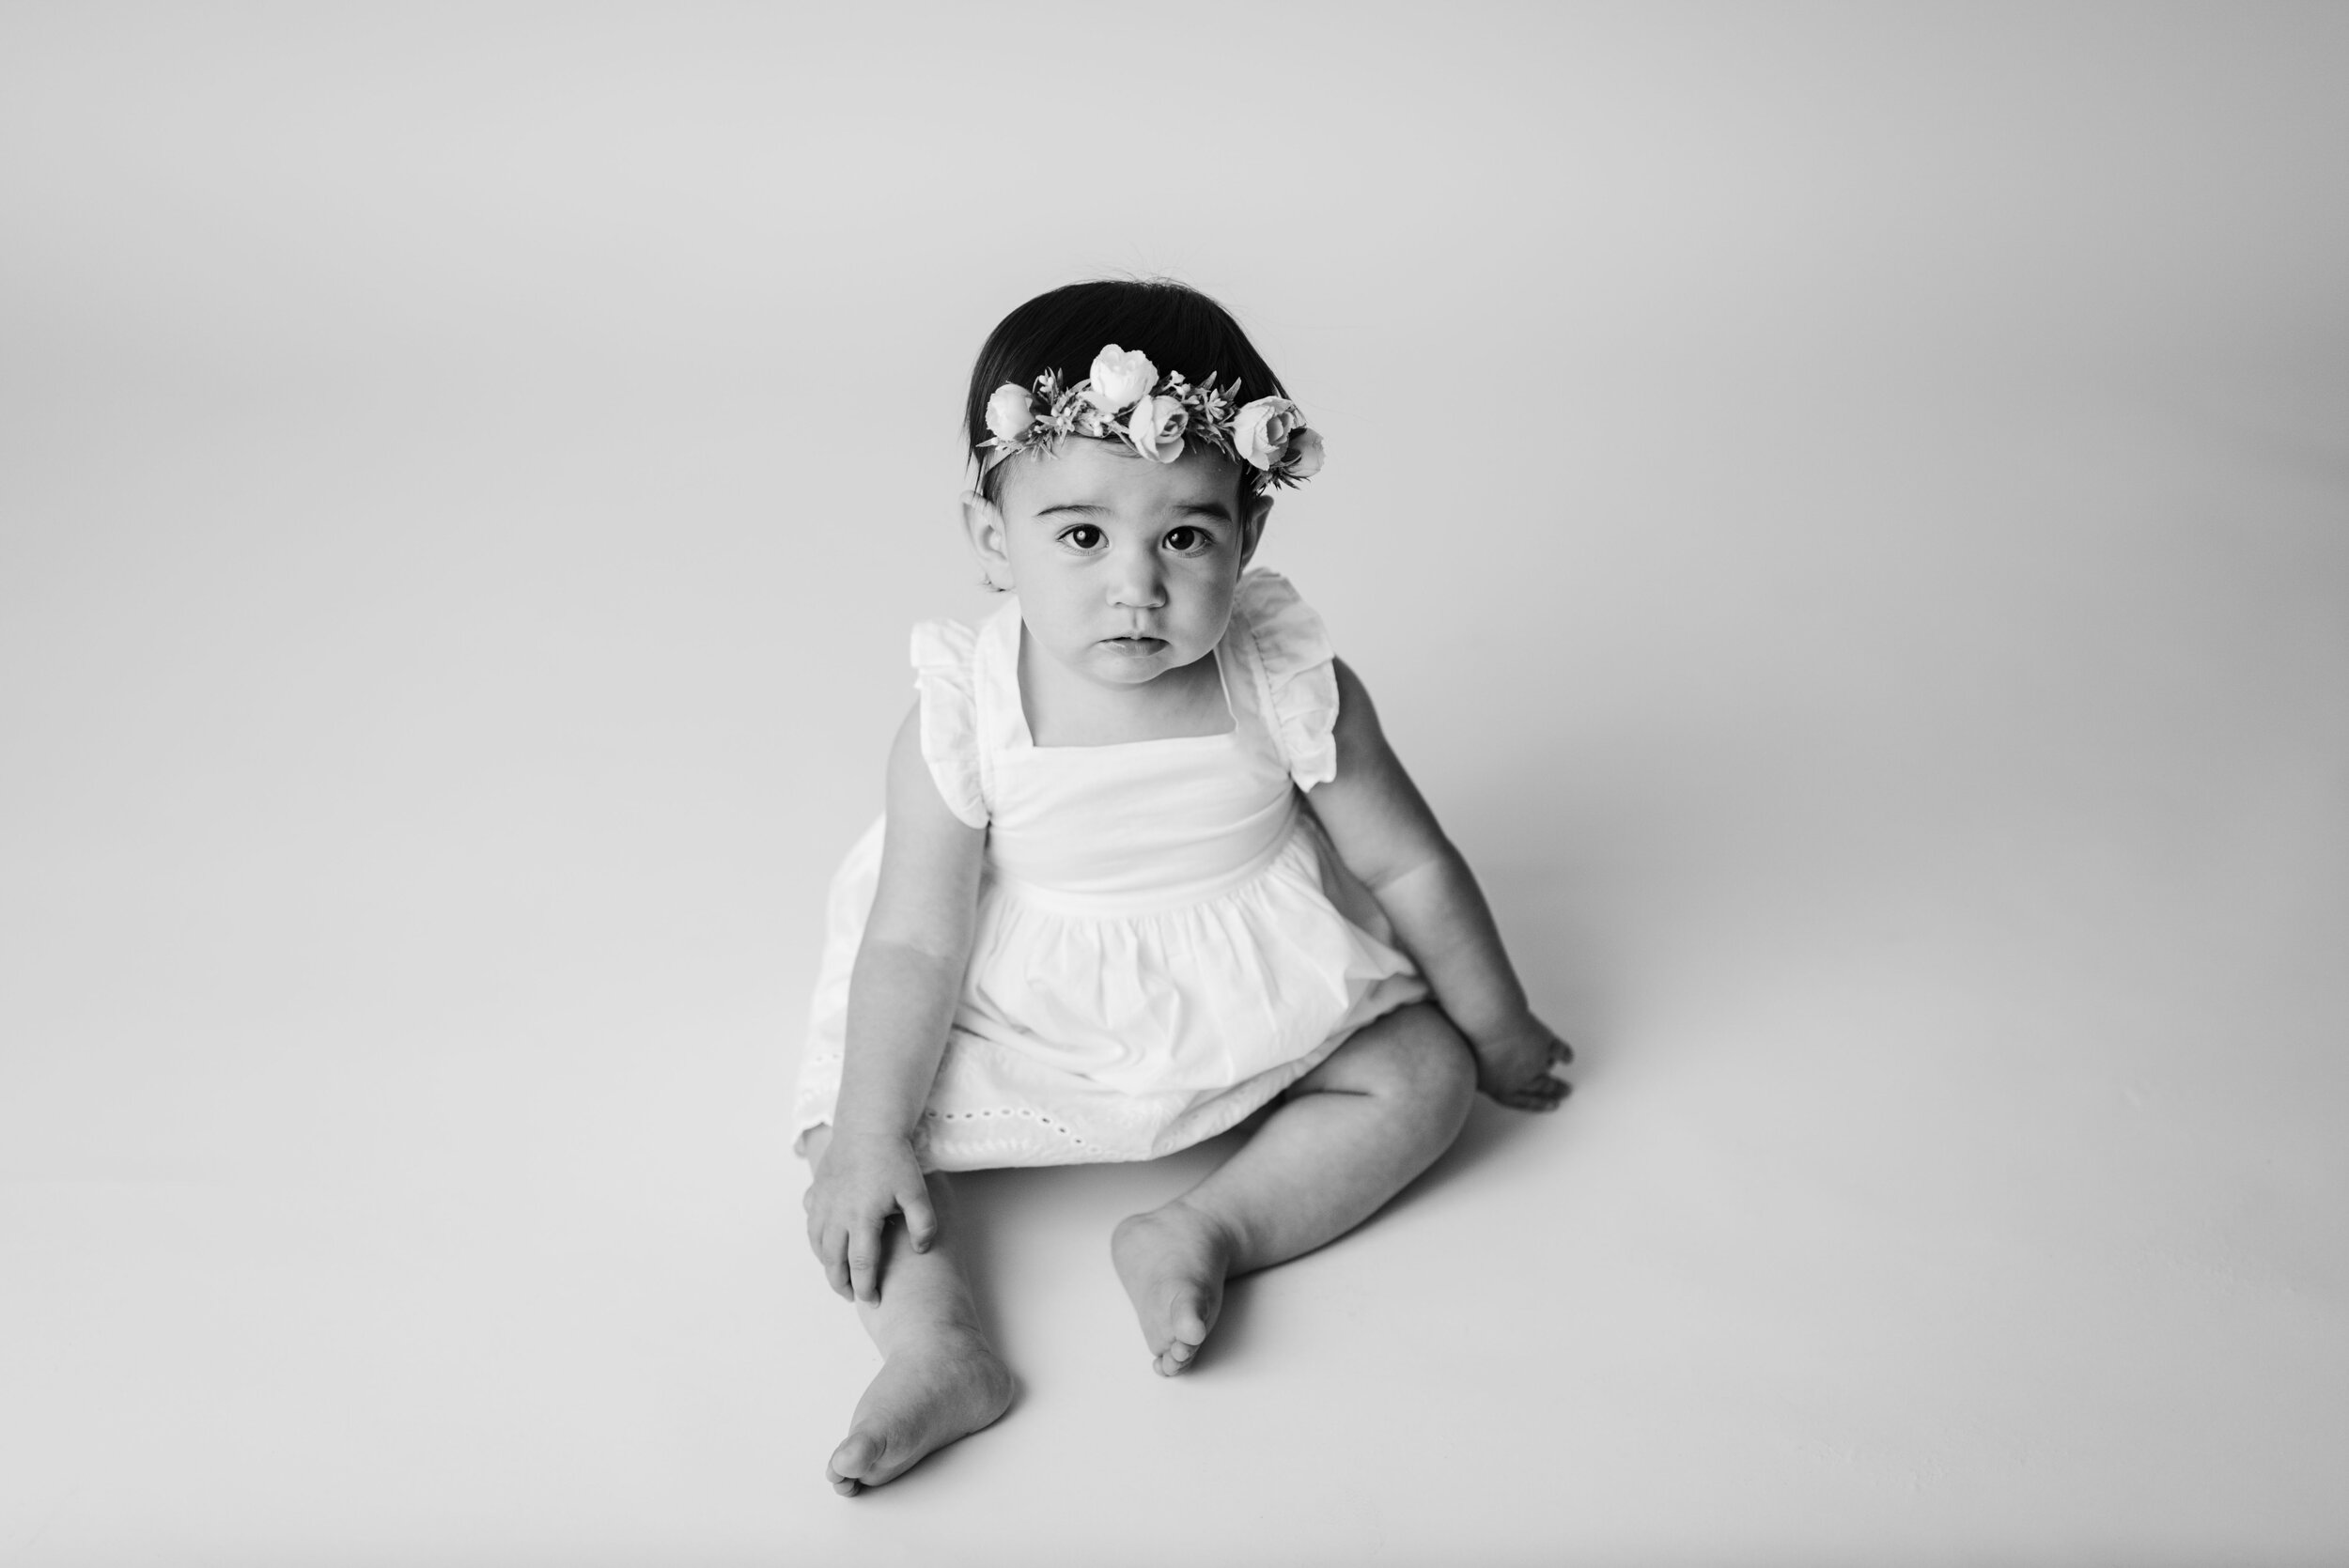 Grow with Me Packages are a great way to capture all of those milestones from birth to first birthday cake smashes in Lafayette Indiana at Kelly’s downtown photography studio.